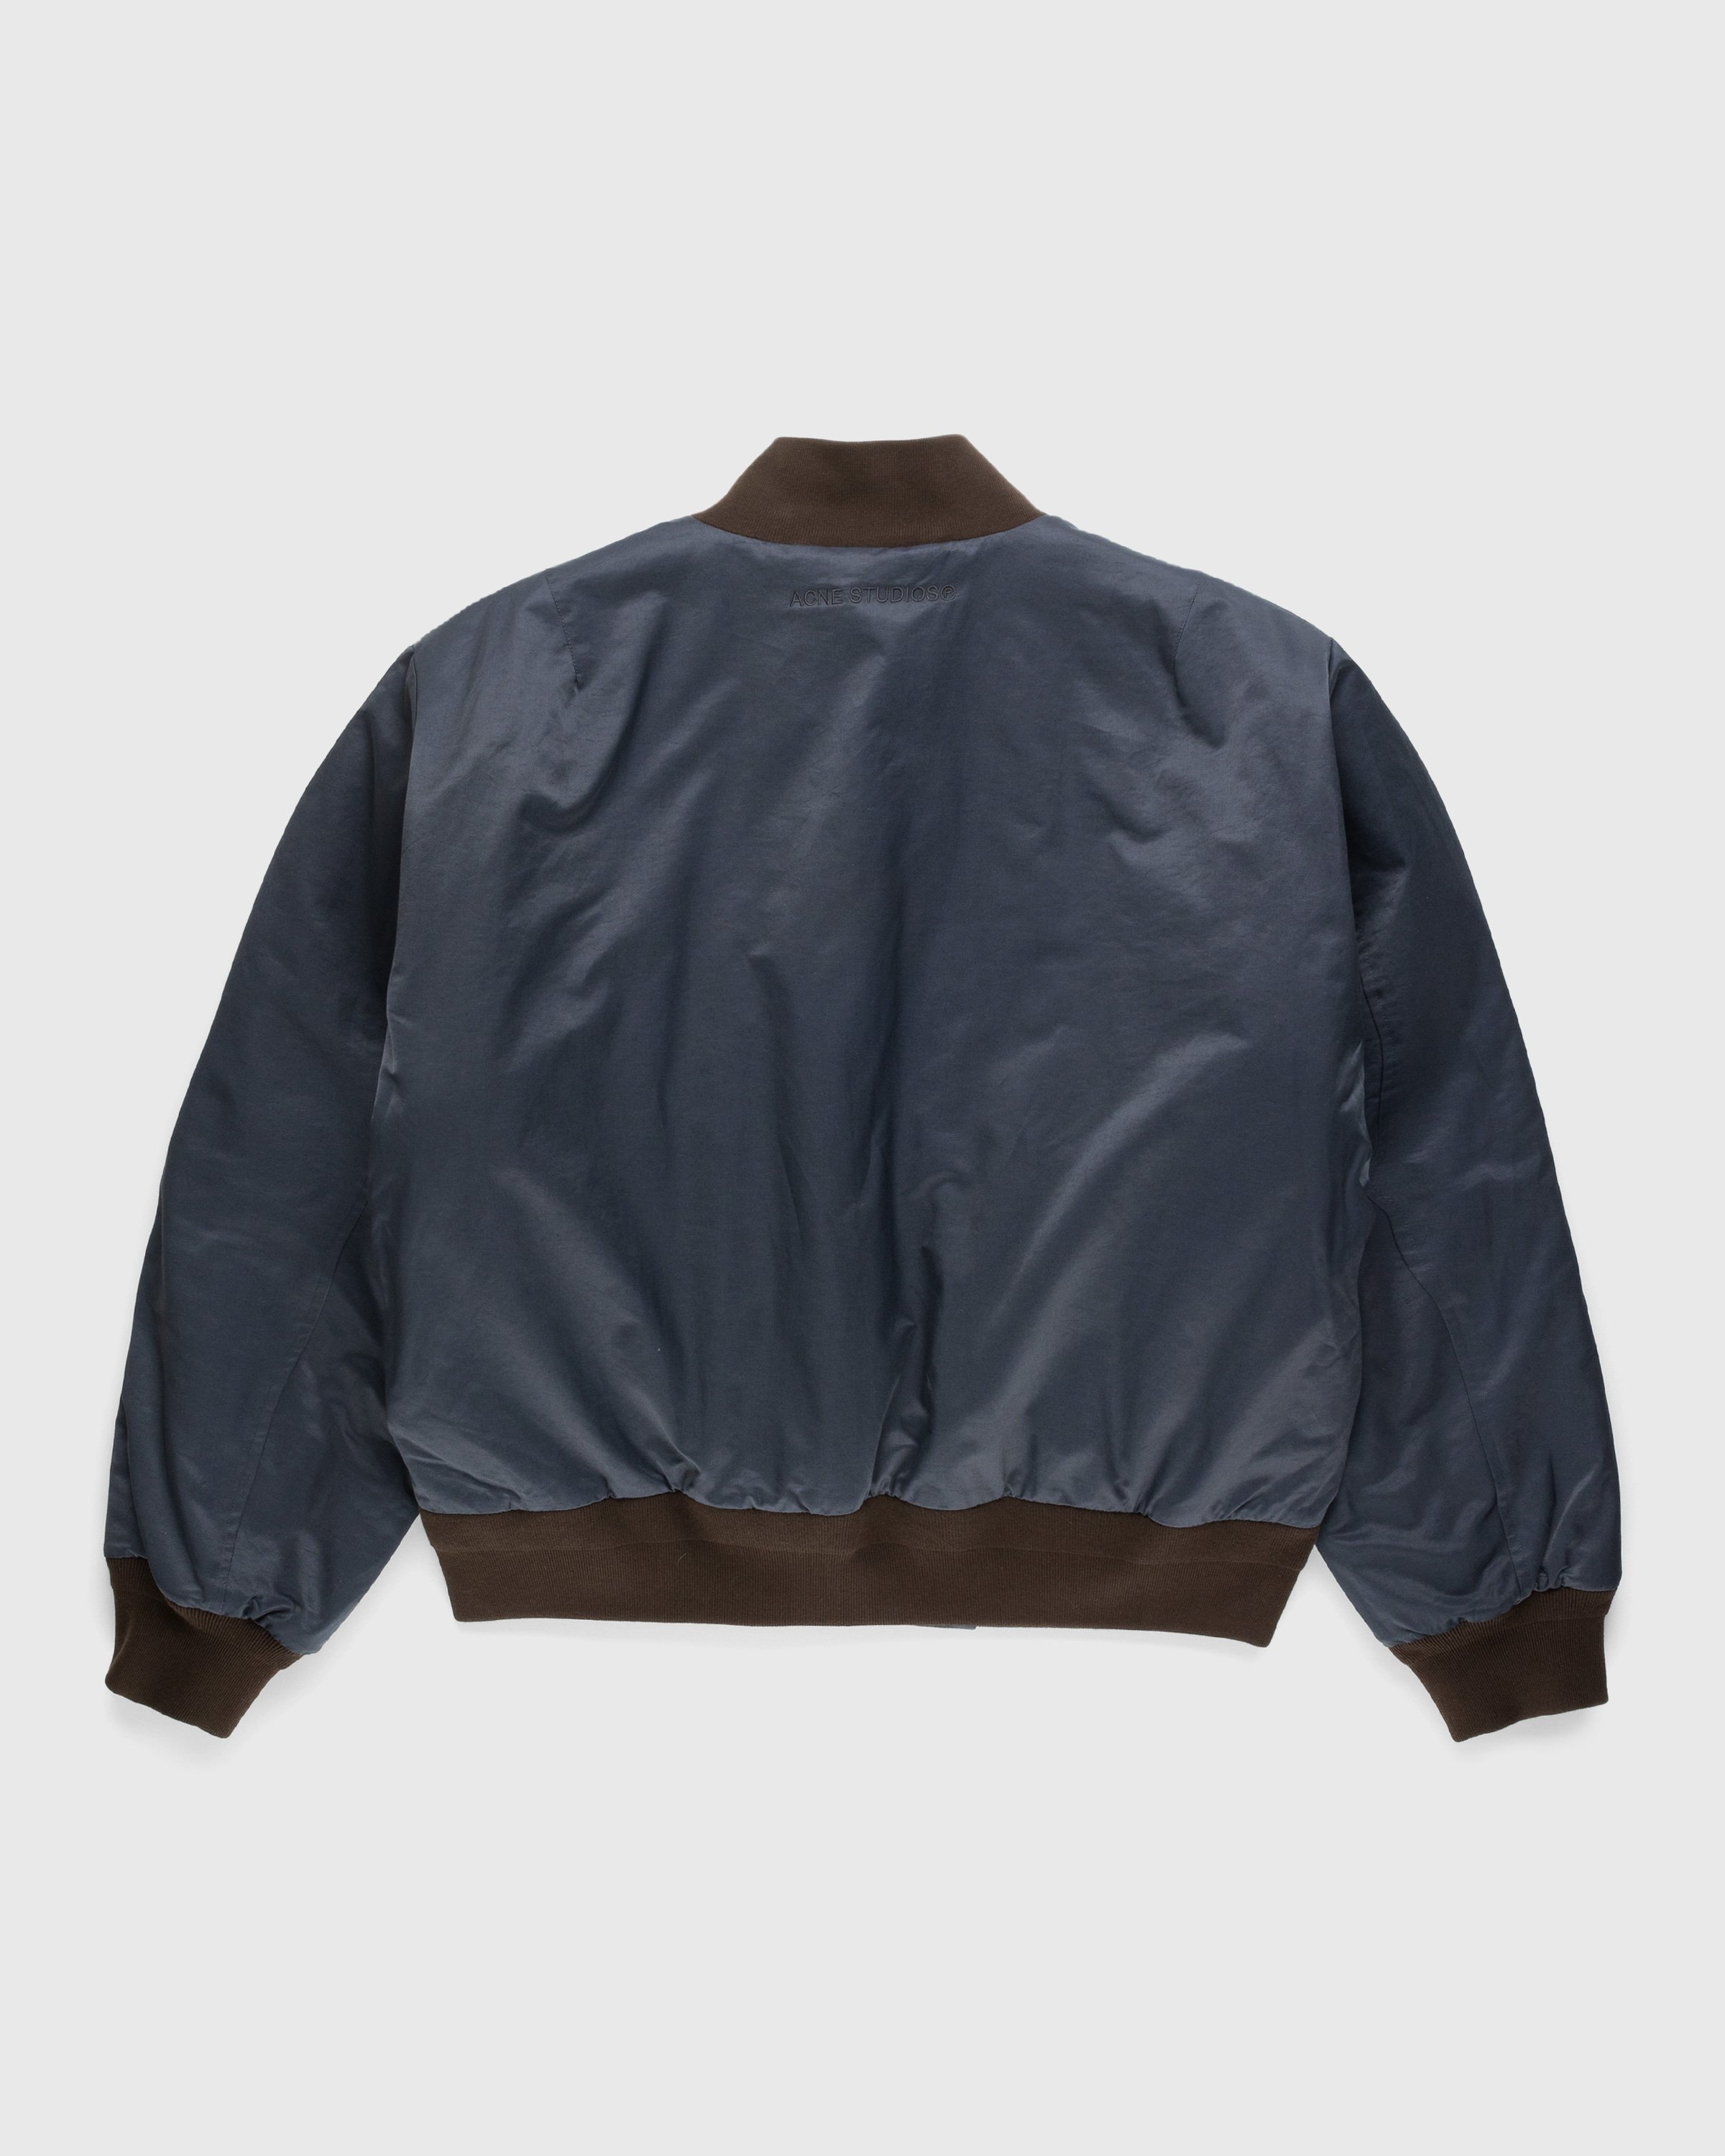 Acne Studios - Reversible Patch Bomber Jacket Anthracite Grey - Clothing - Brown - Image 3